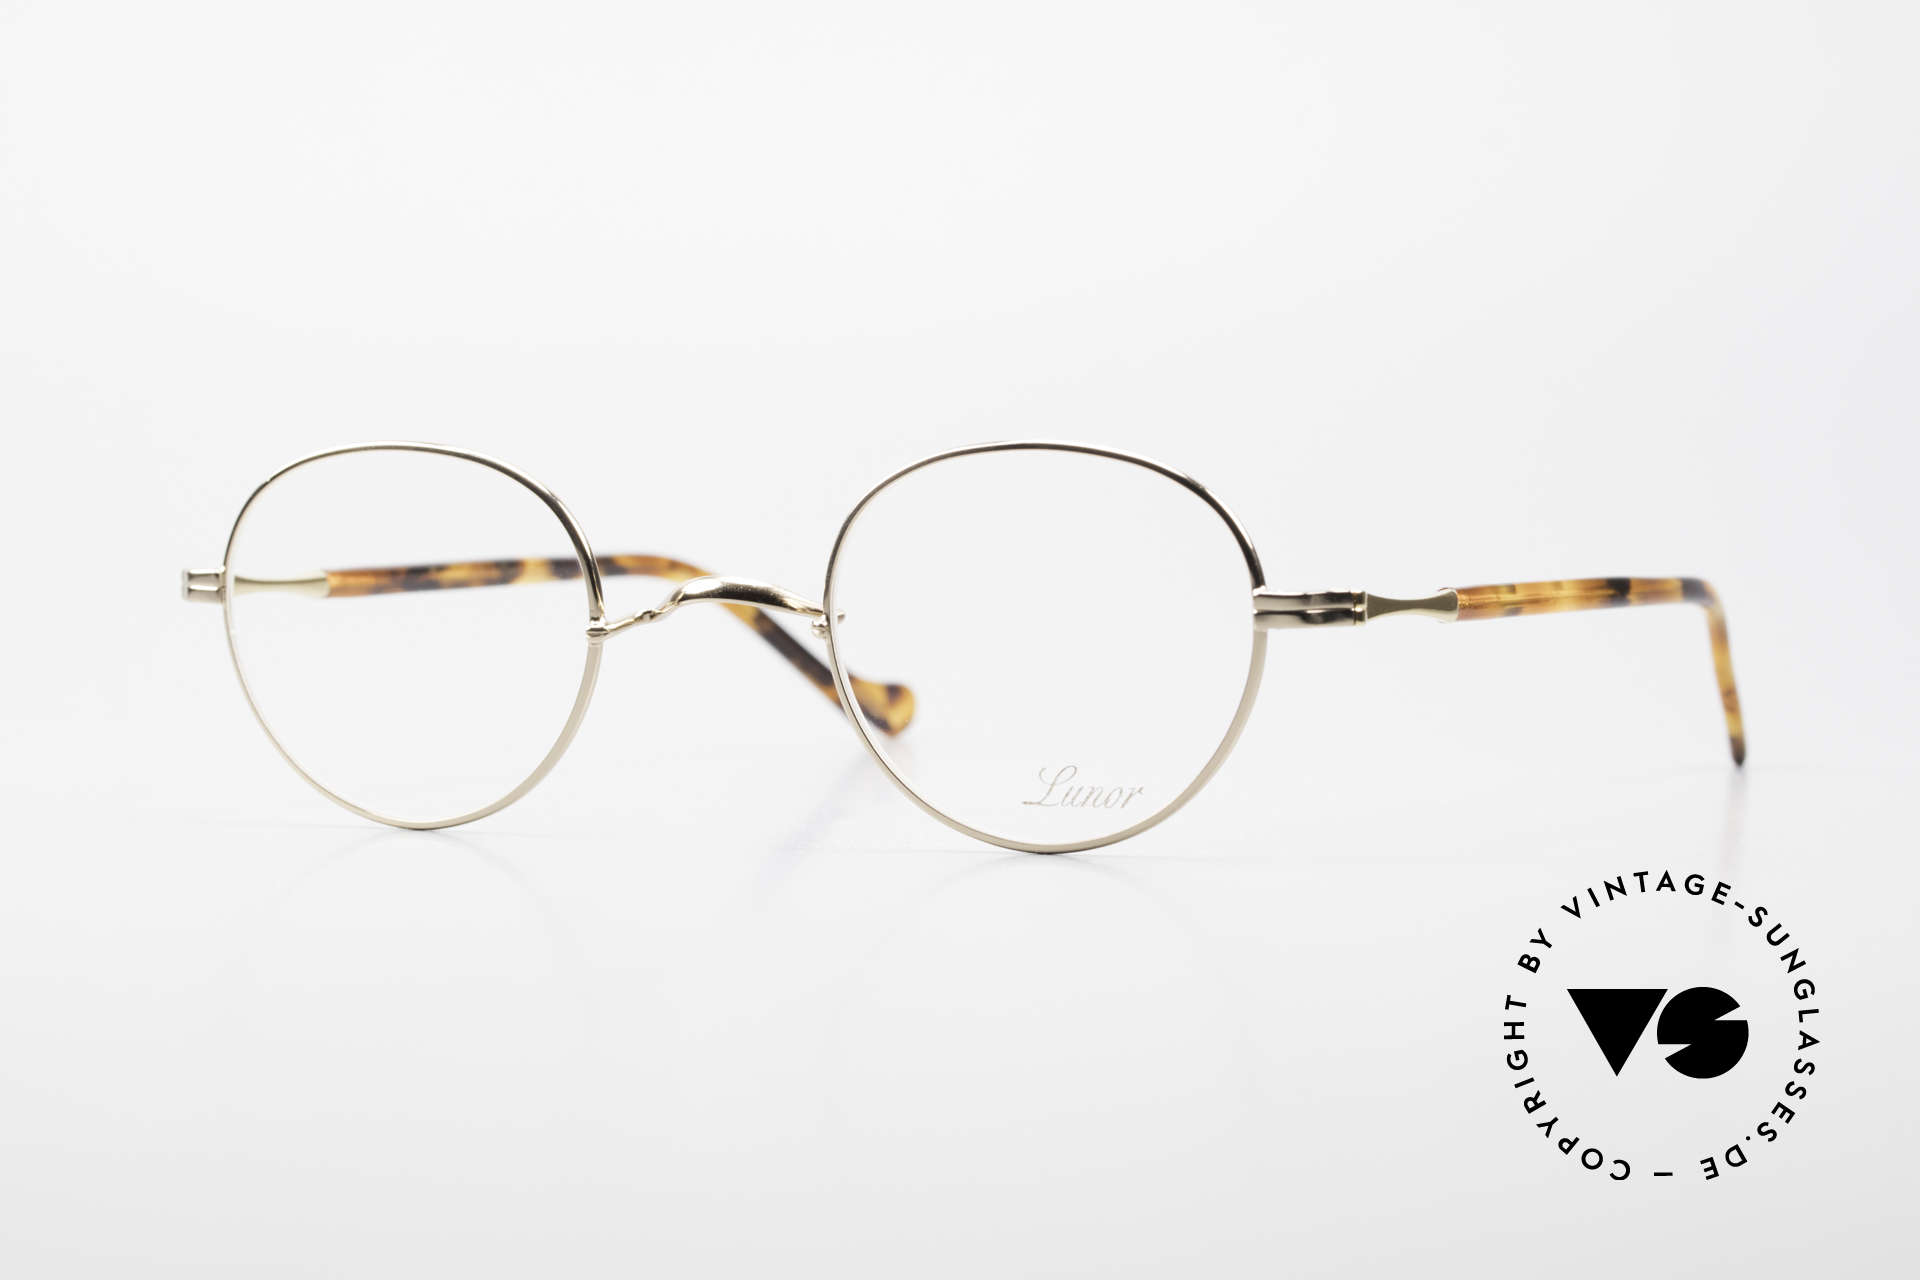 Lunor II A 22 Round Lunor Specs Gold Plated, Lunor glasses of the II-A series: metal & acetate combi, Made for Men and Women